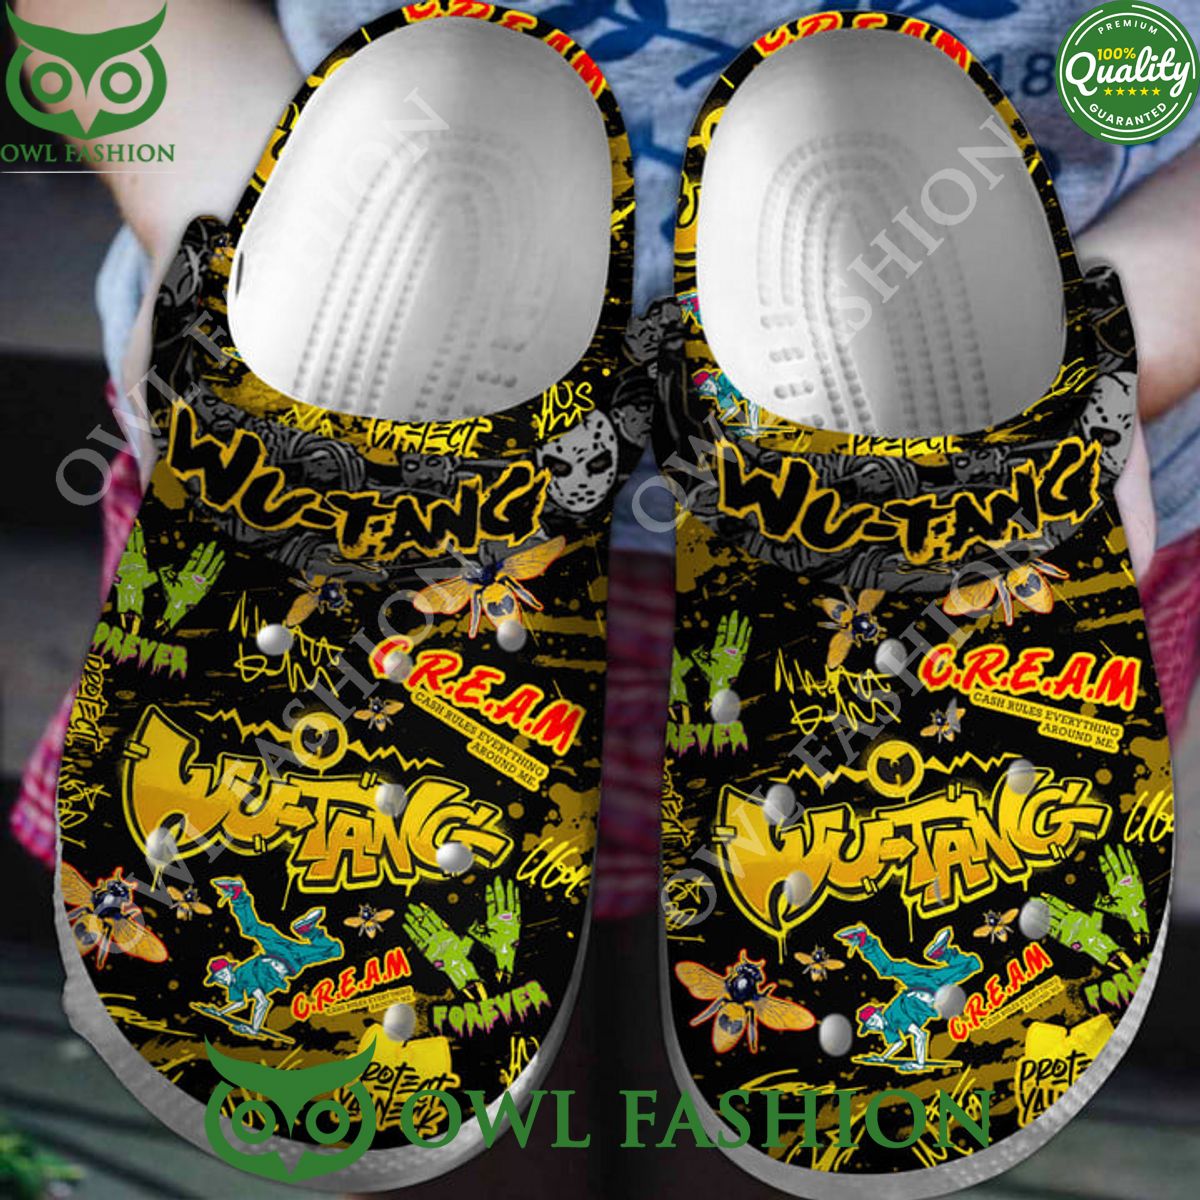 Wu Tang Clan Cream Scared Crocs This design has a strong emotional impact.